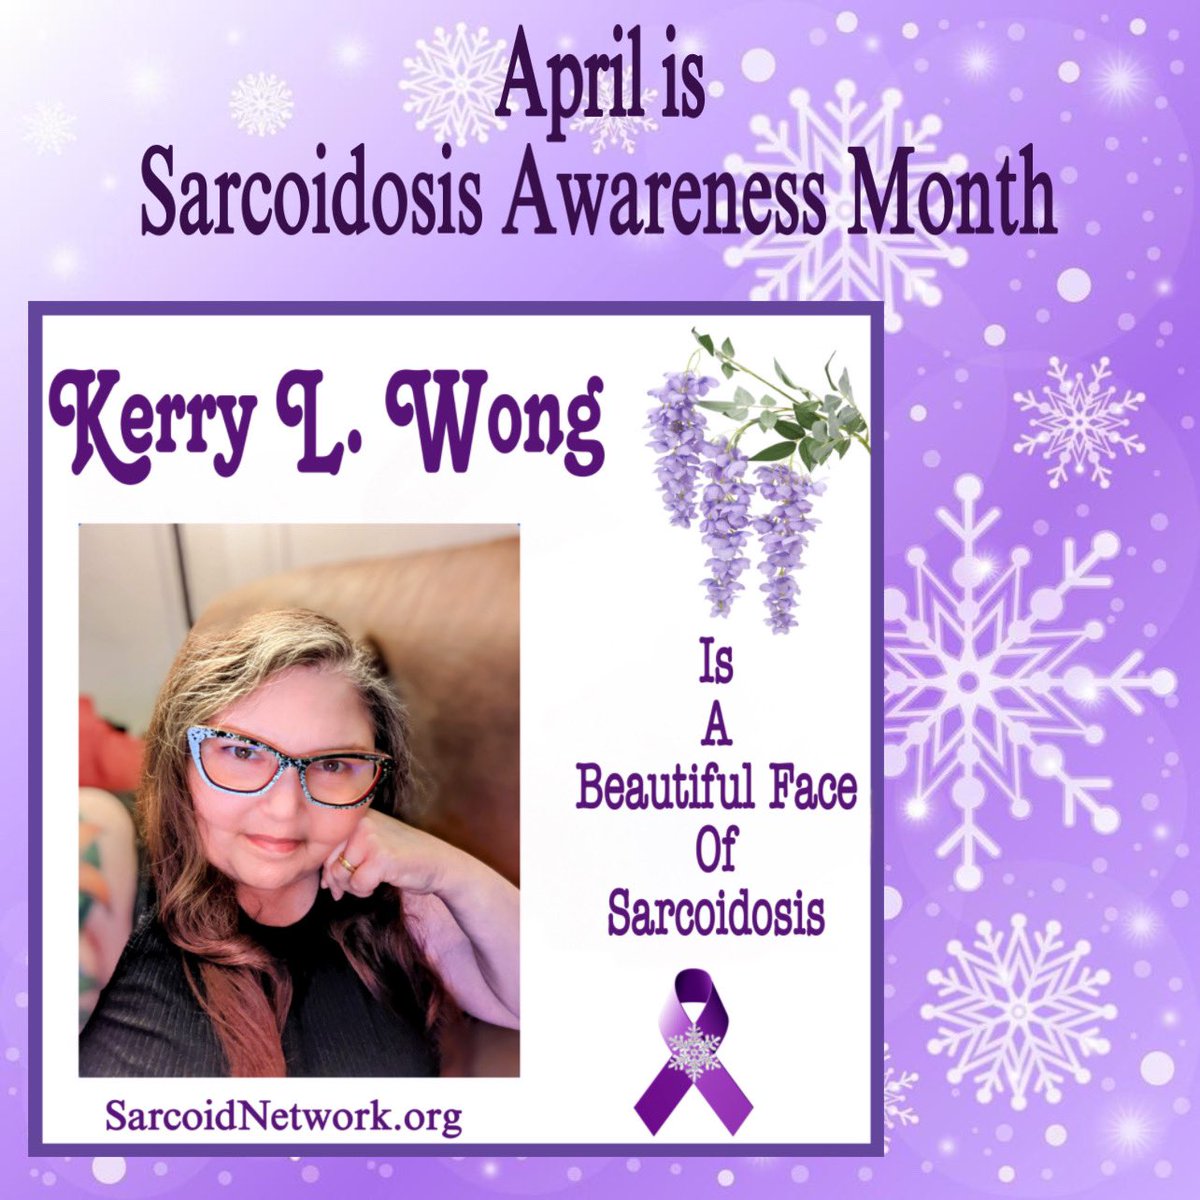 Always an honor to be included in @Sarcoid_Network's #BeautifulFacesOfSarcoidosis campaign.

Share YOUR beautiful face: send a pic & quote/bio/message to SarcoidNetwork1@gmail.com.
~ 🦋
#SarcoidosisAwarenessMonth #SarcBeauty #SarcStories #SarcStrong